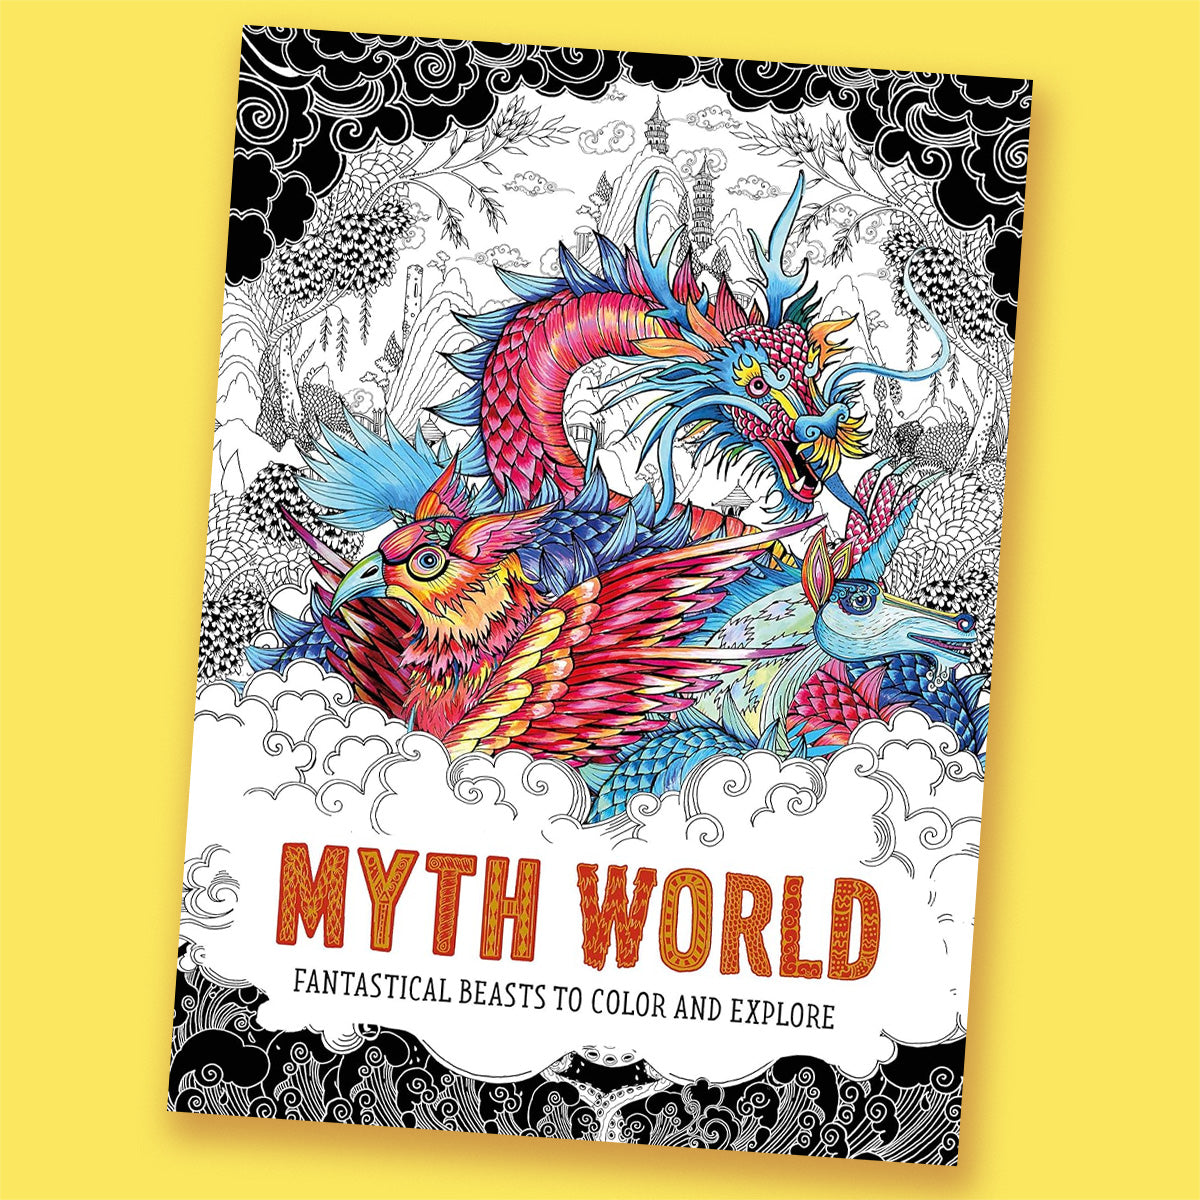 Myth World: Fantastical Beasts to Color and Explore by Good Wives and Warriors